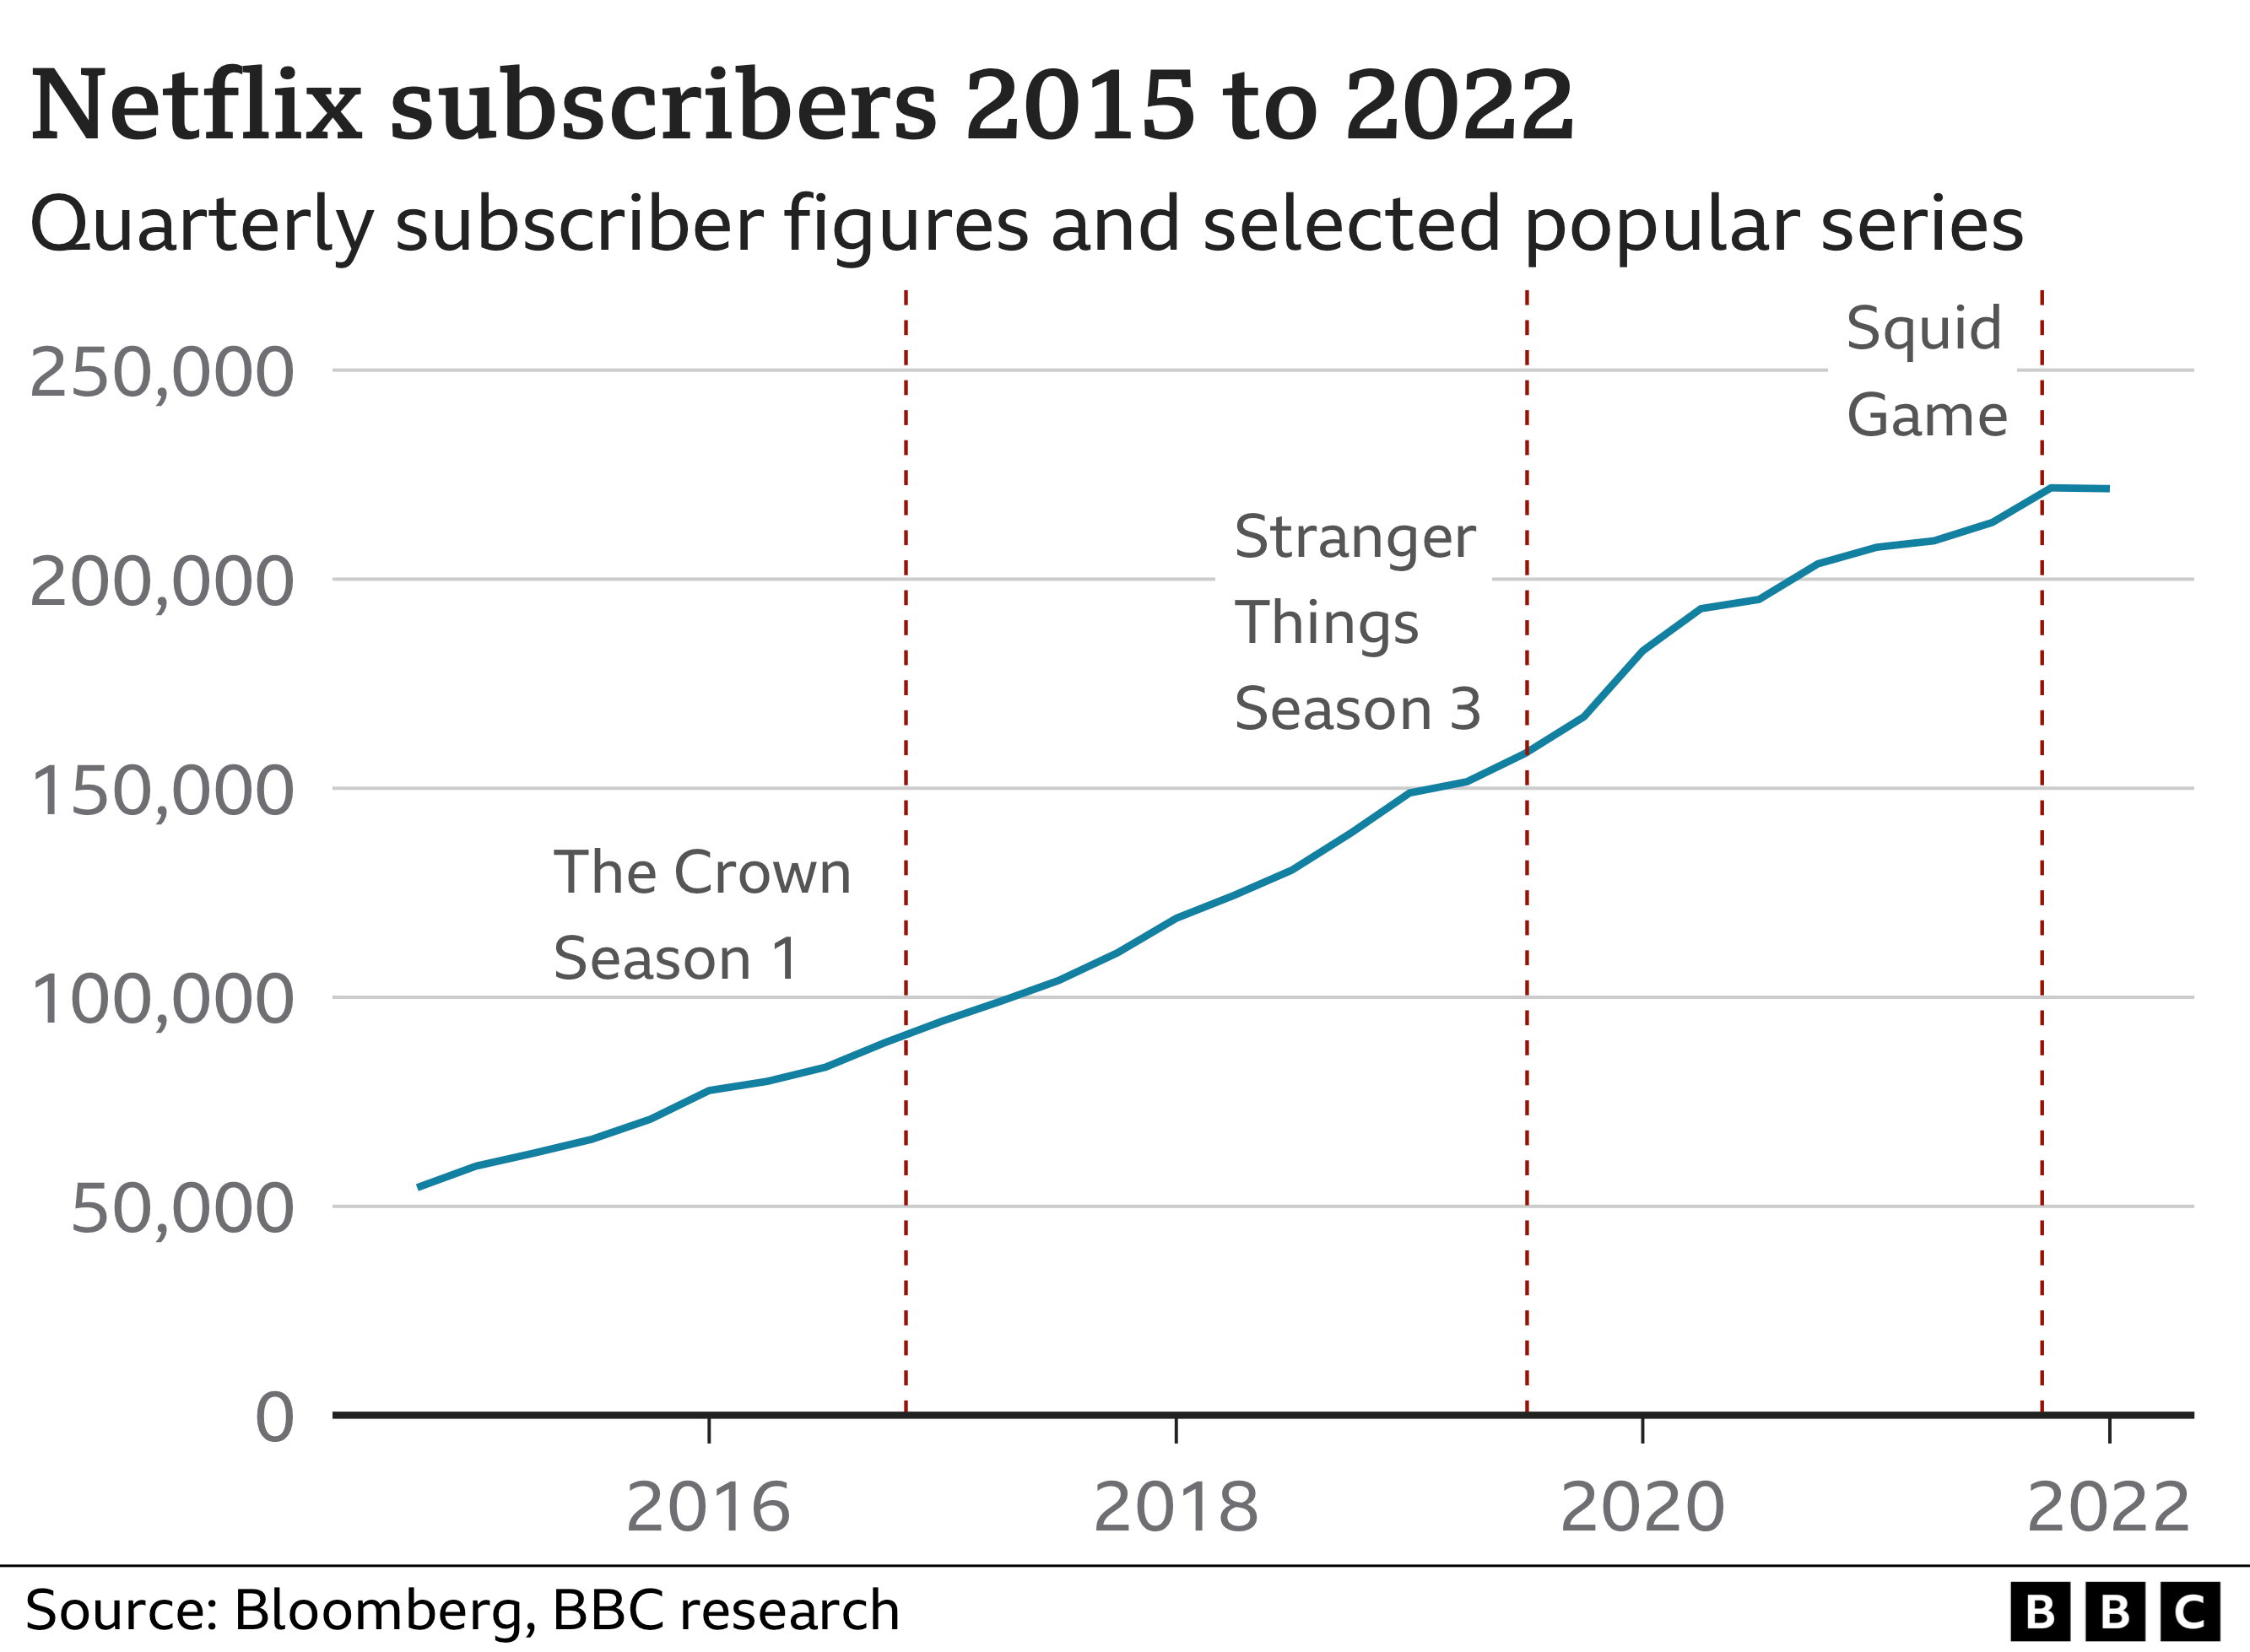 Netflix subscribers and selected shows